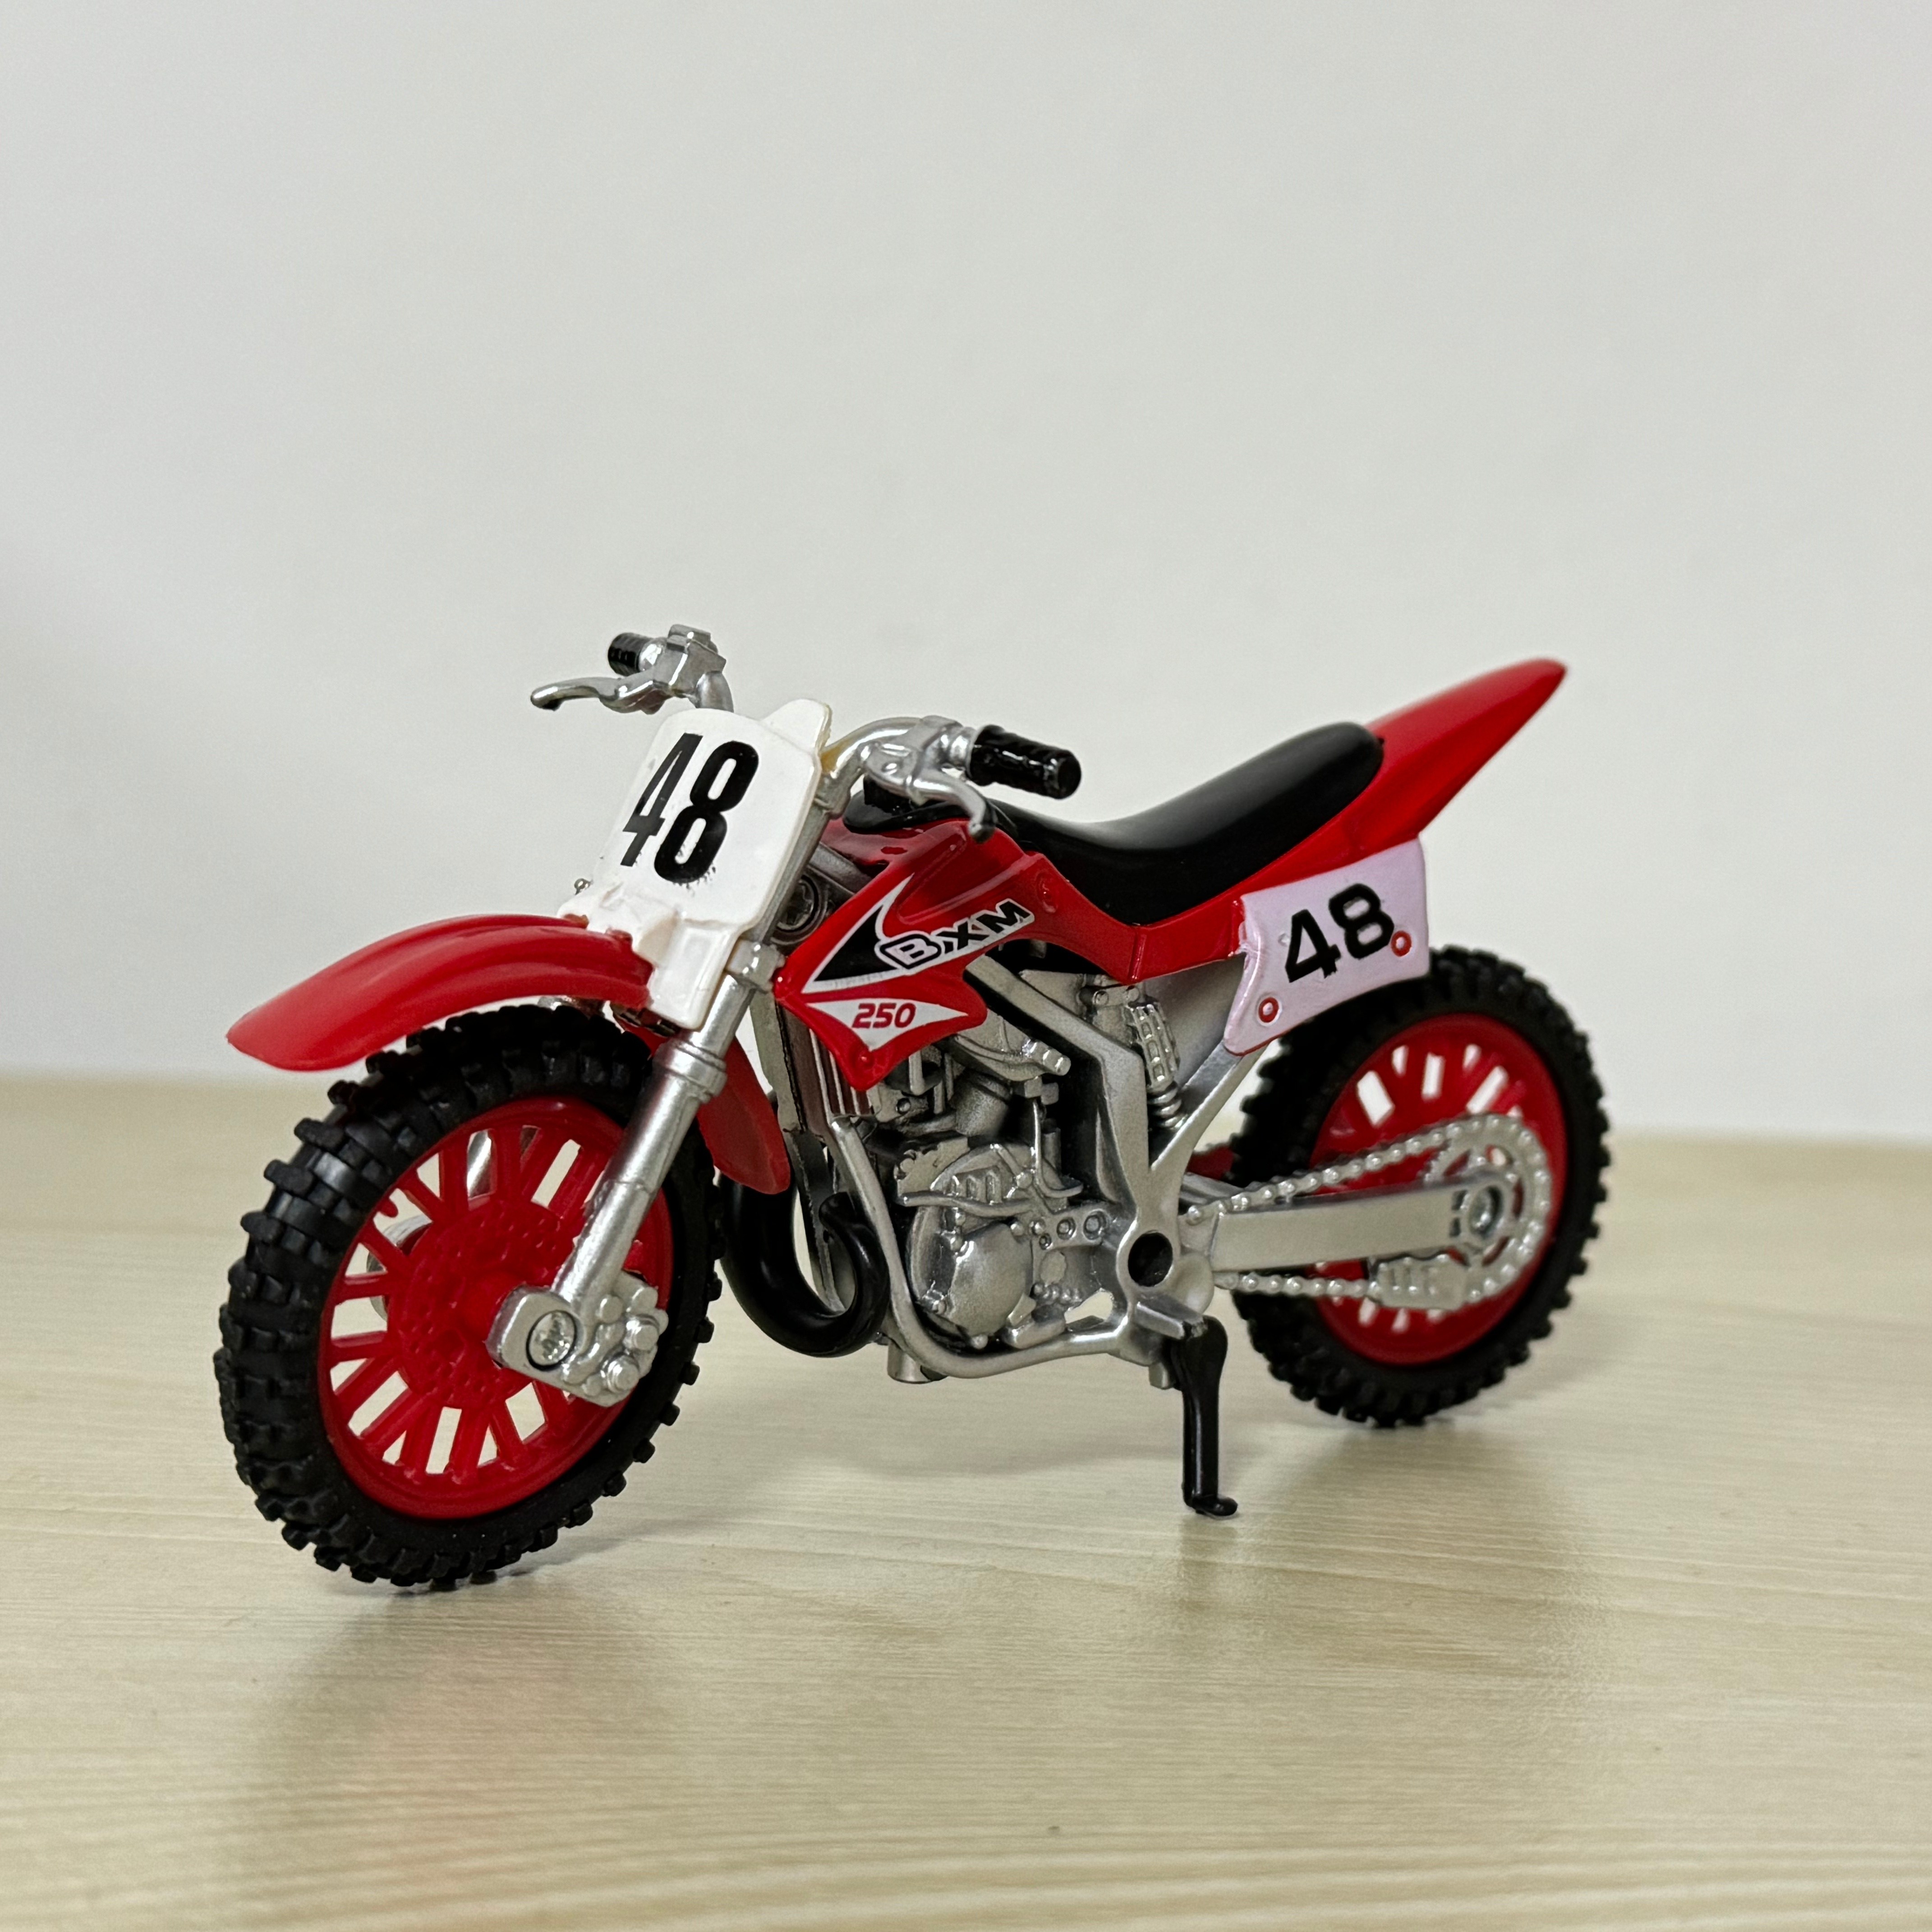 Fule Supercross,1:18 Scale Die-Cast Motorcycles Model, Toy Moto Bike for  Kids and Collectors Ages 3 and up(Green)